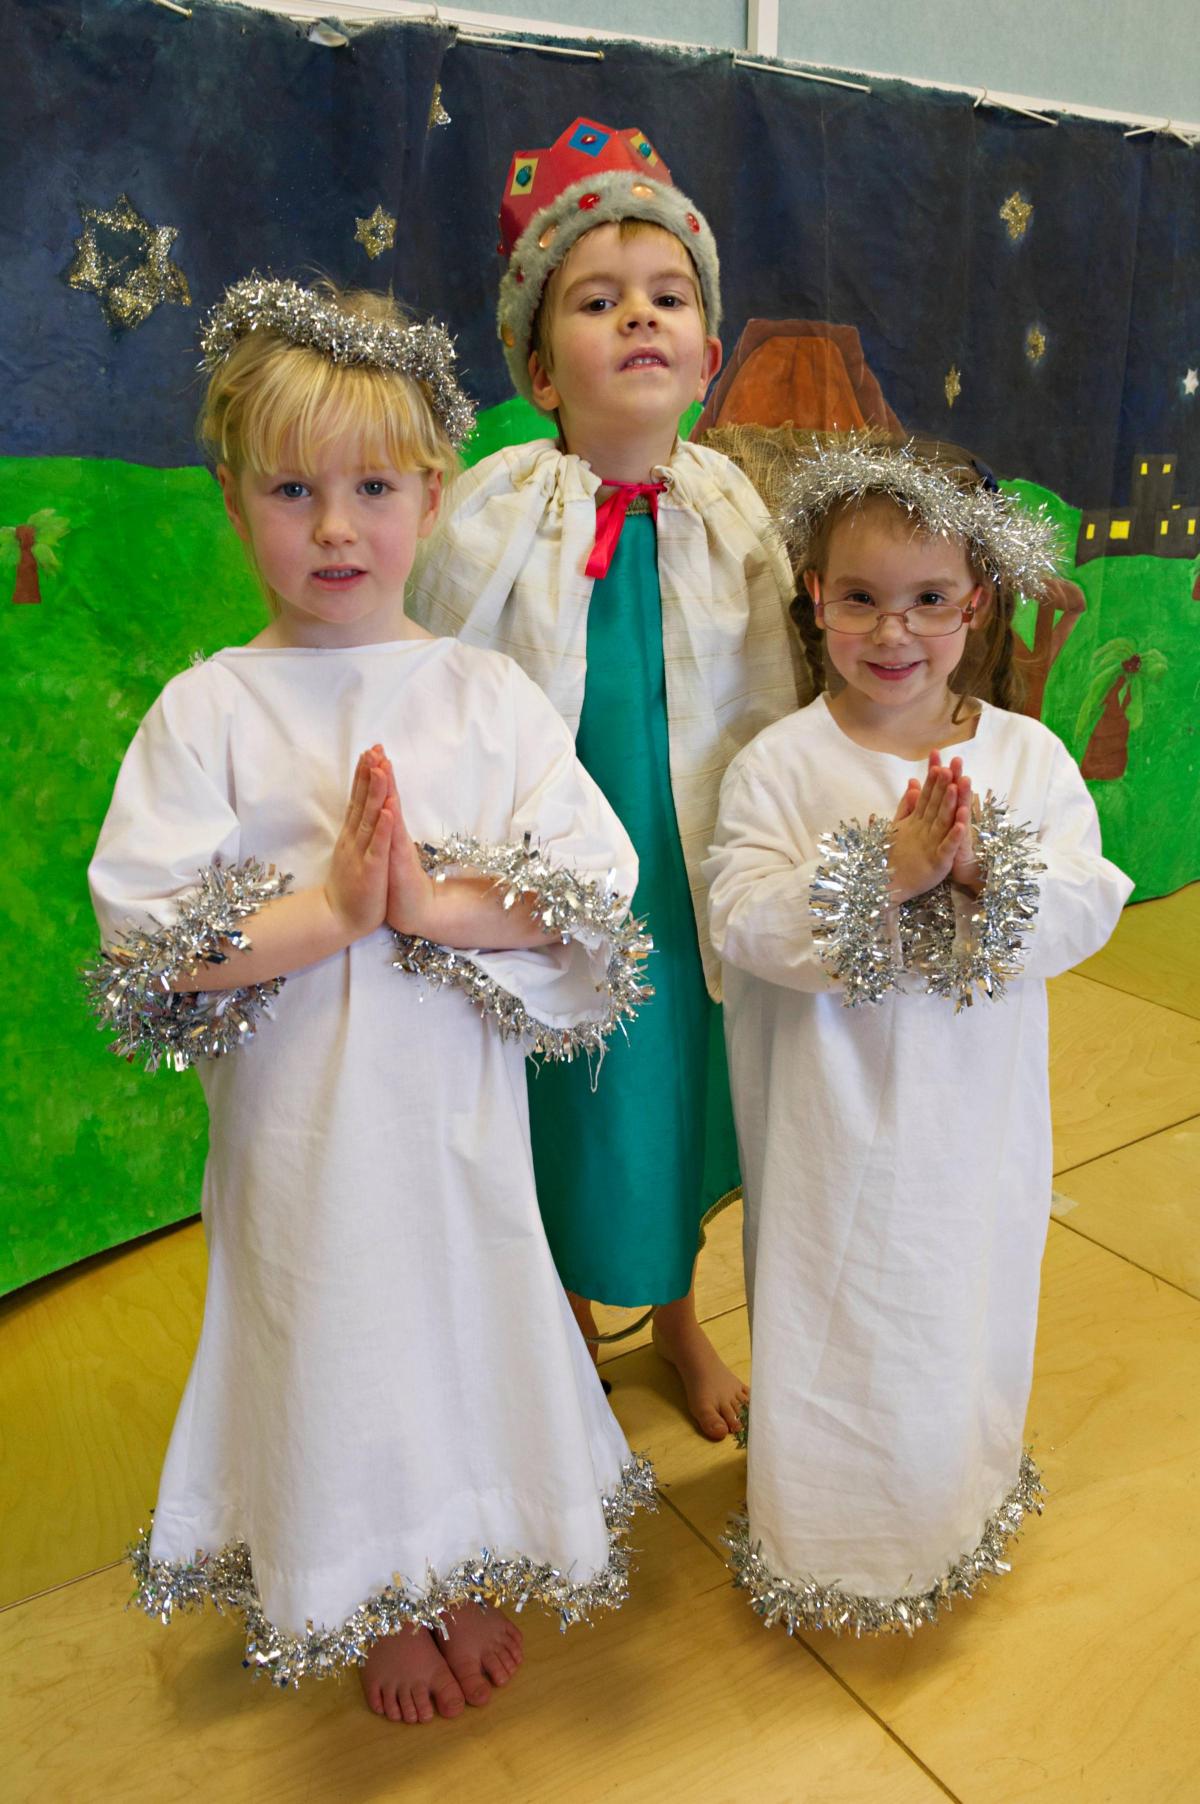 Pictures by Samantha Cook Photography. 25% off nativity photo prints,  just add echosave25 at the checkout